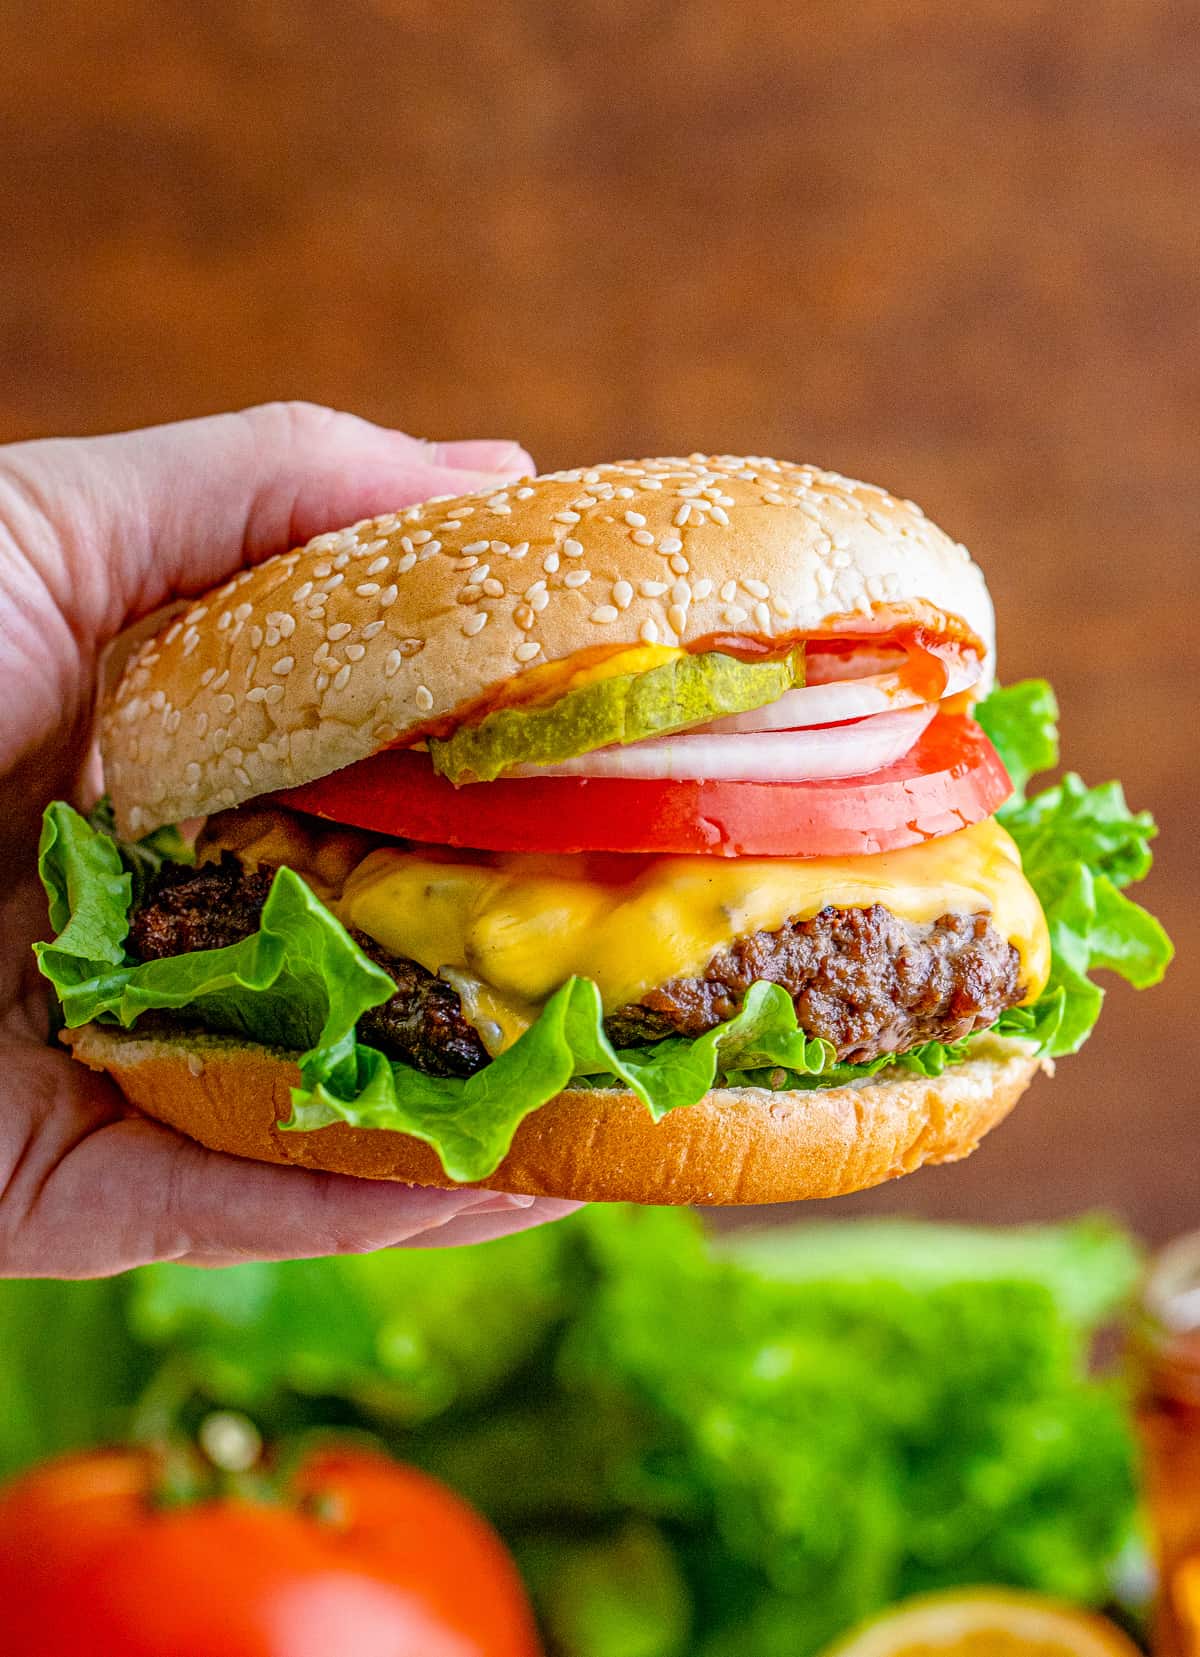 Hand holding up garnished cheeseburger, showing melted cheese down the side.